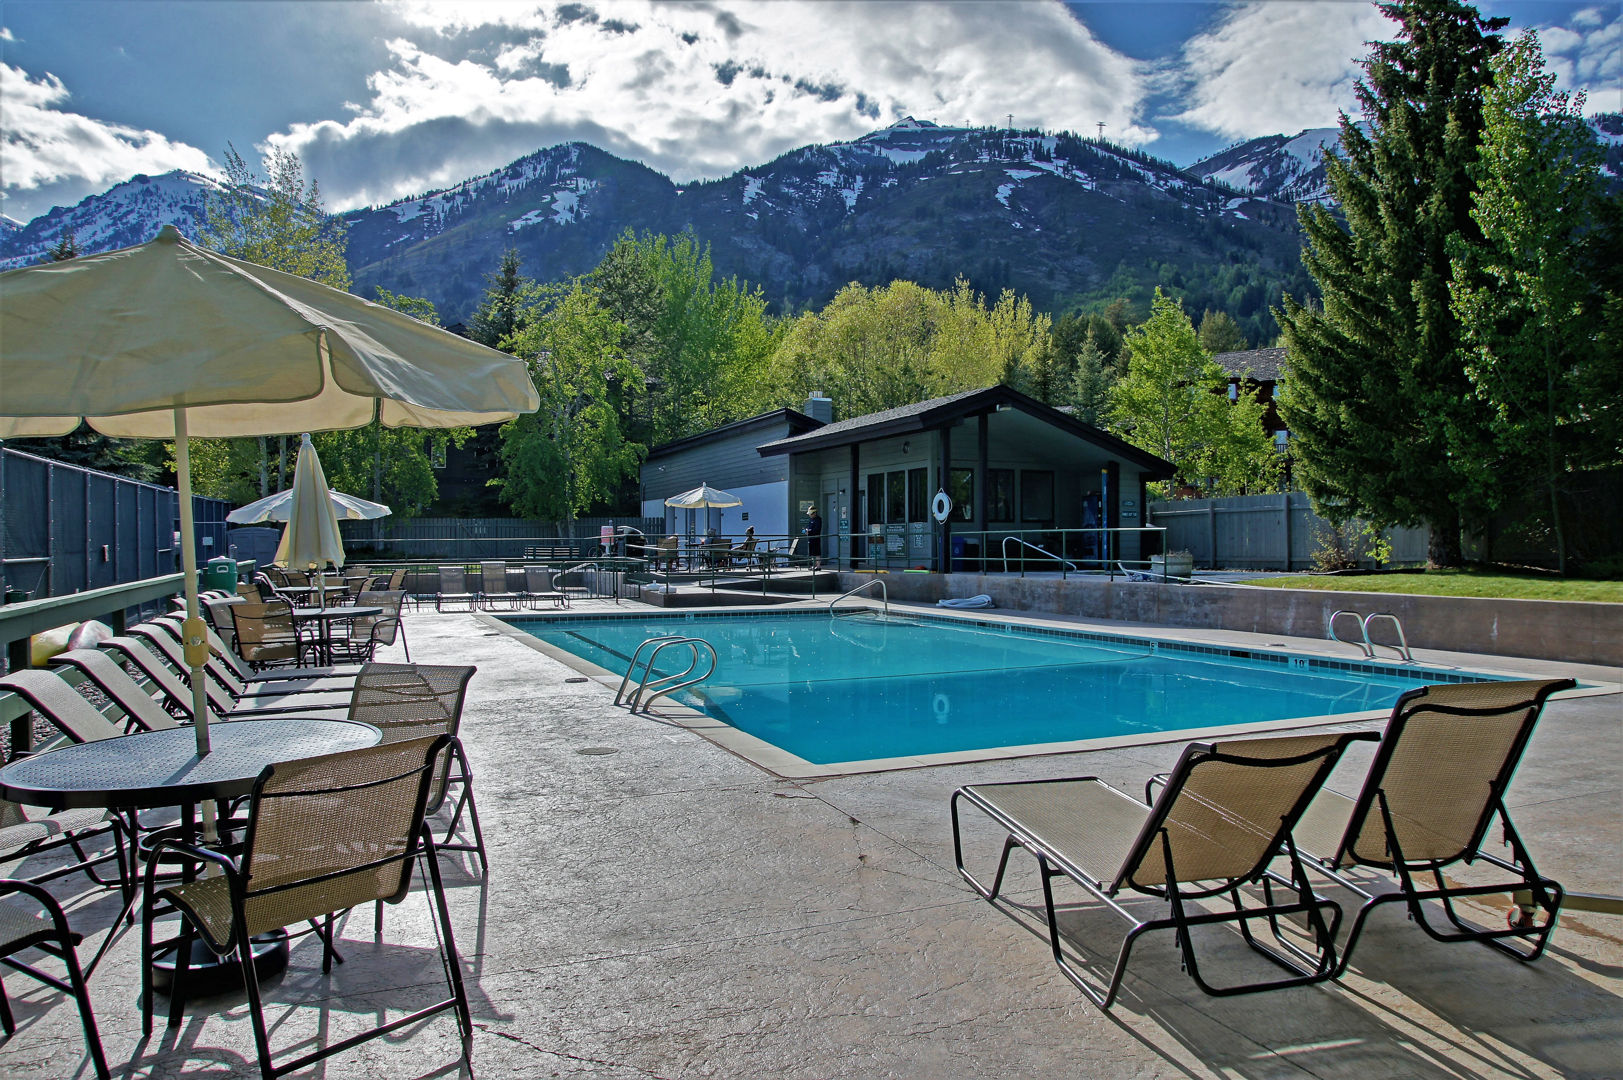 Mountain views from the pool area